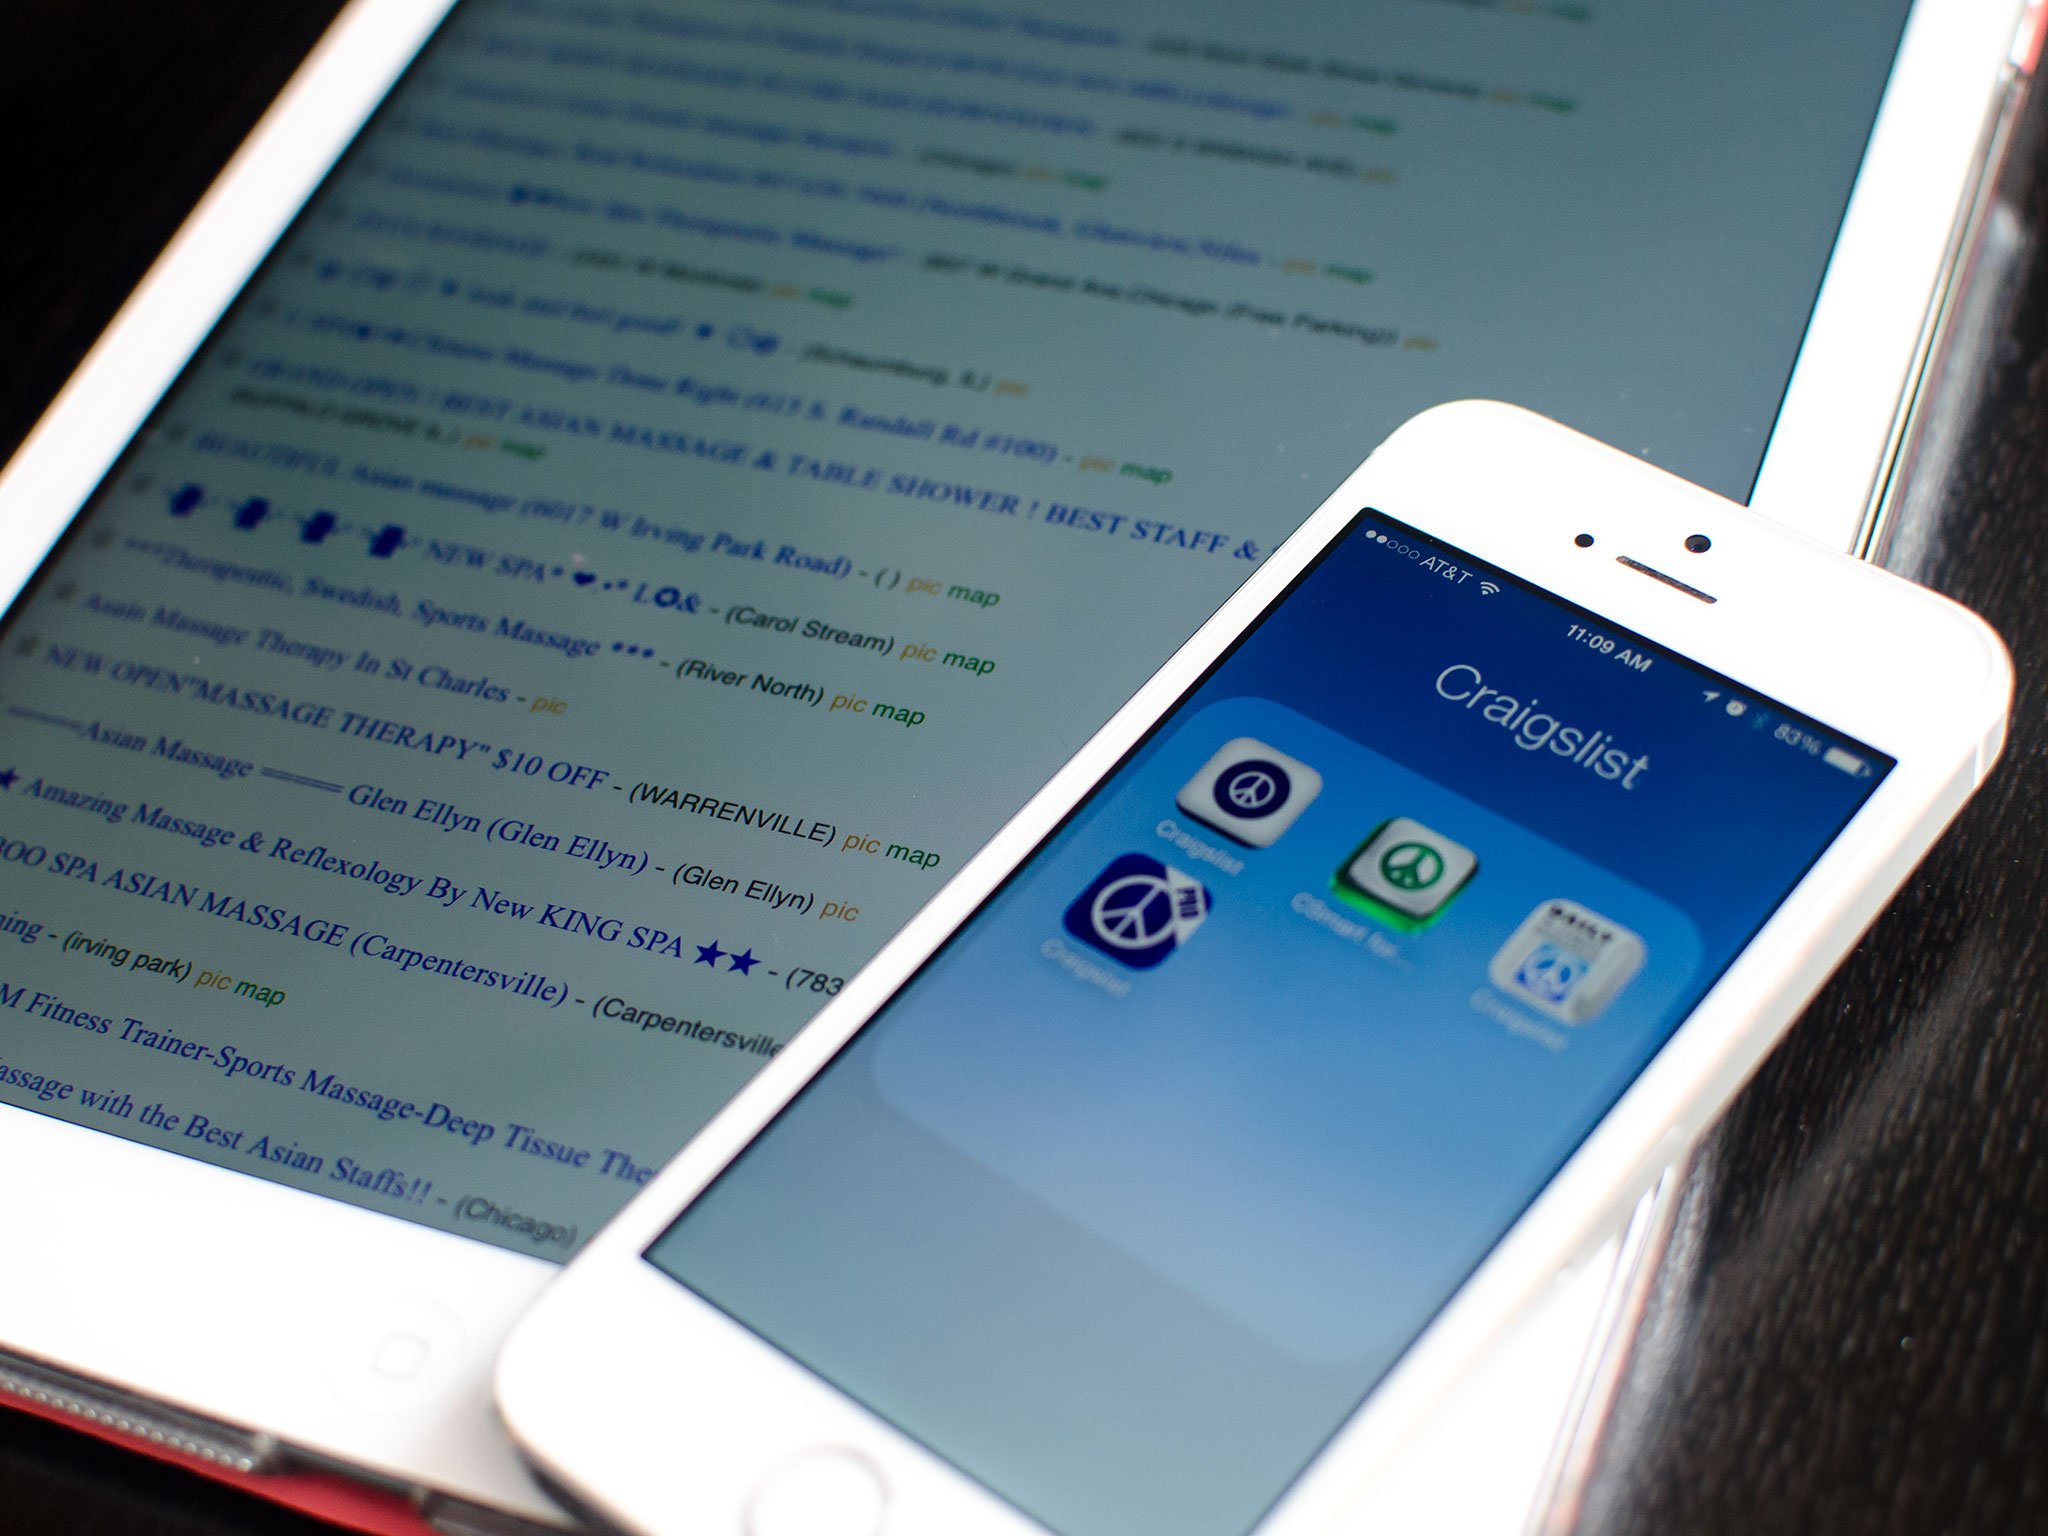 Best Craigslist apps for iPhone and iPad: How to buy and sell better!